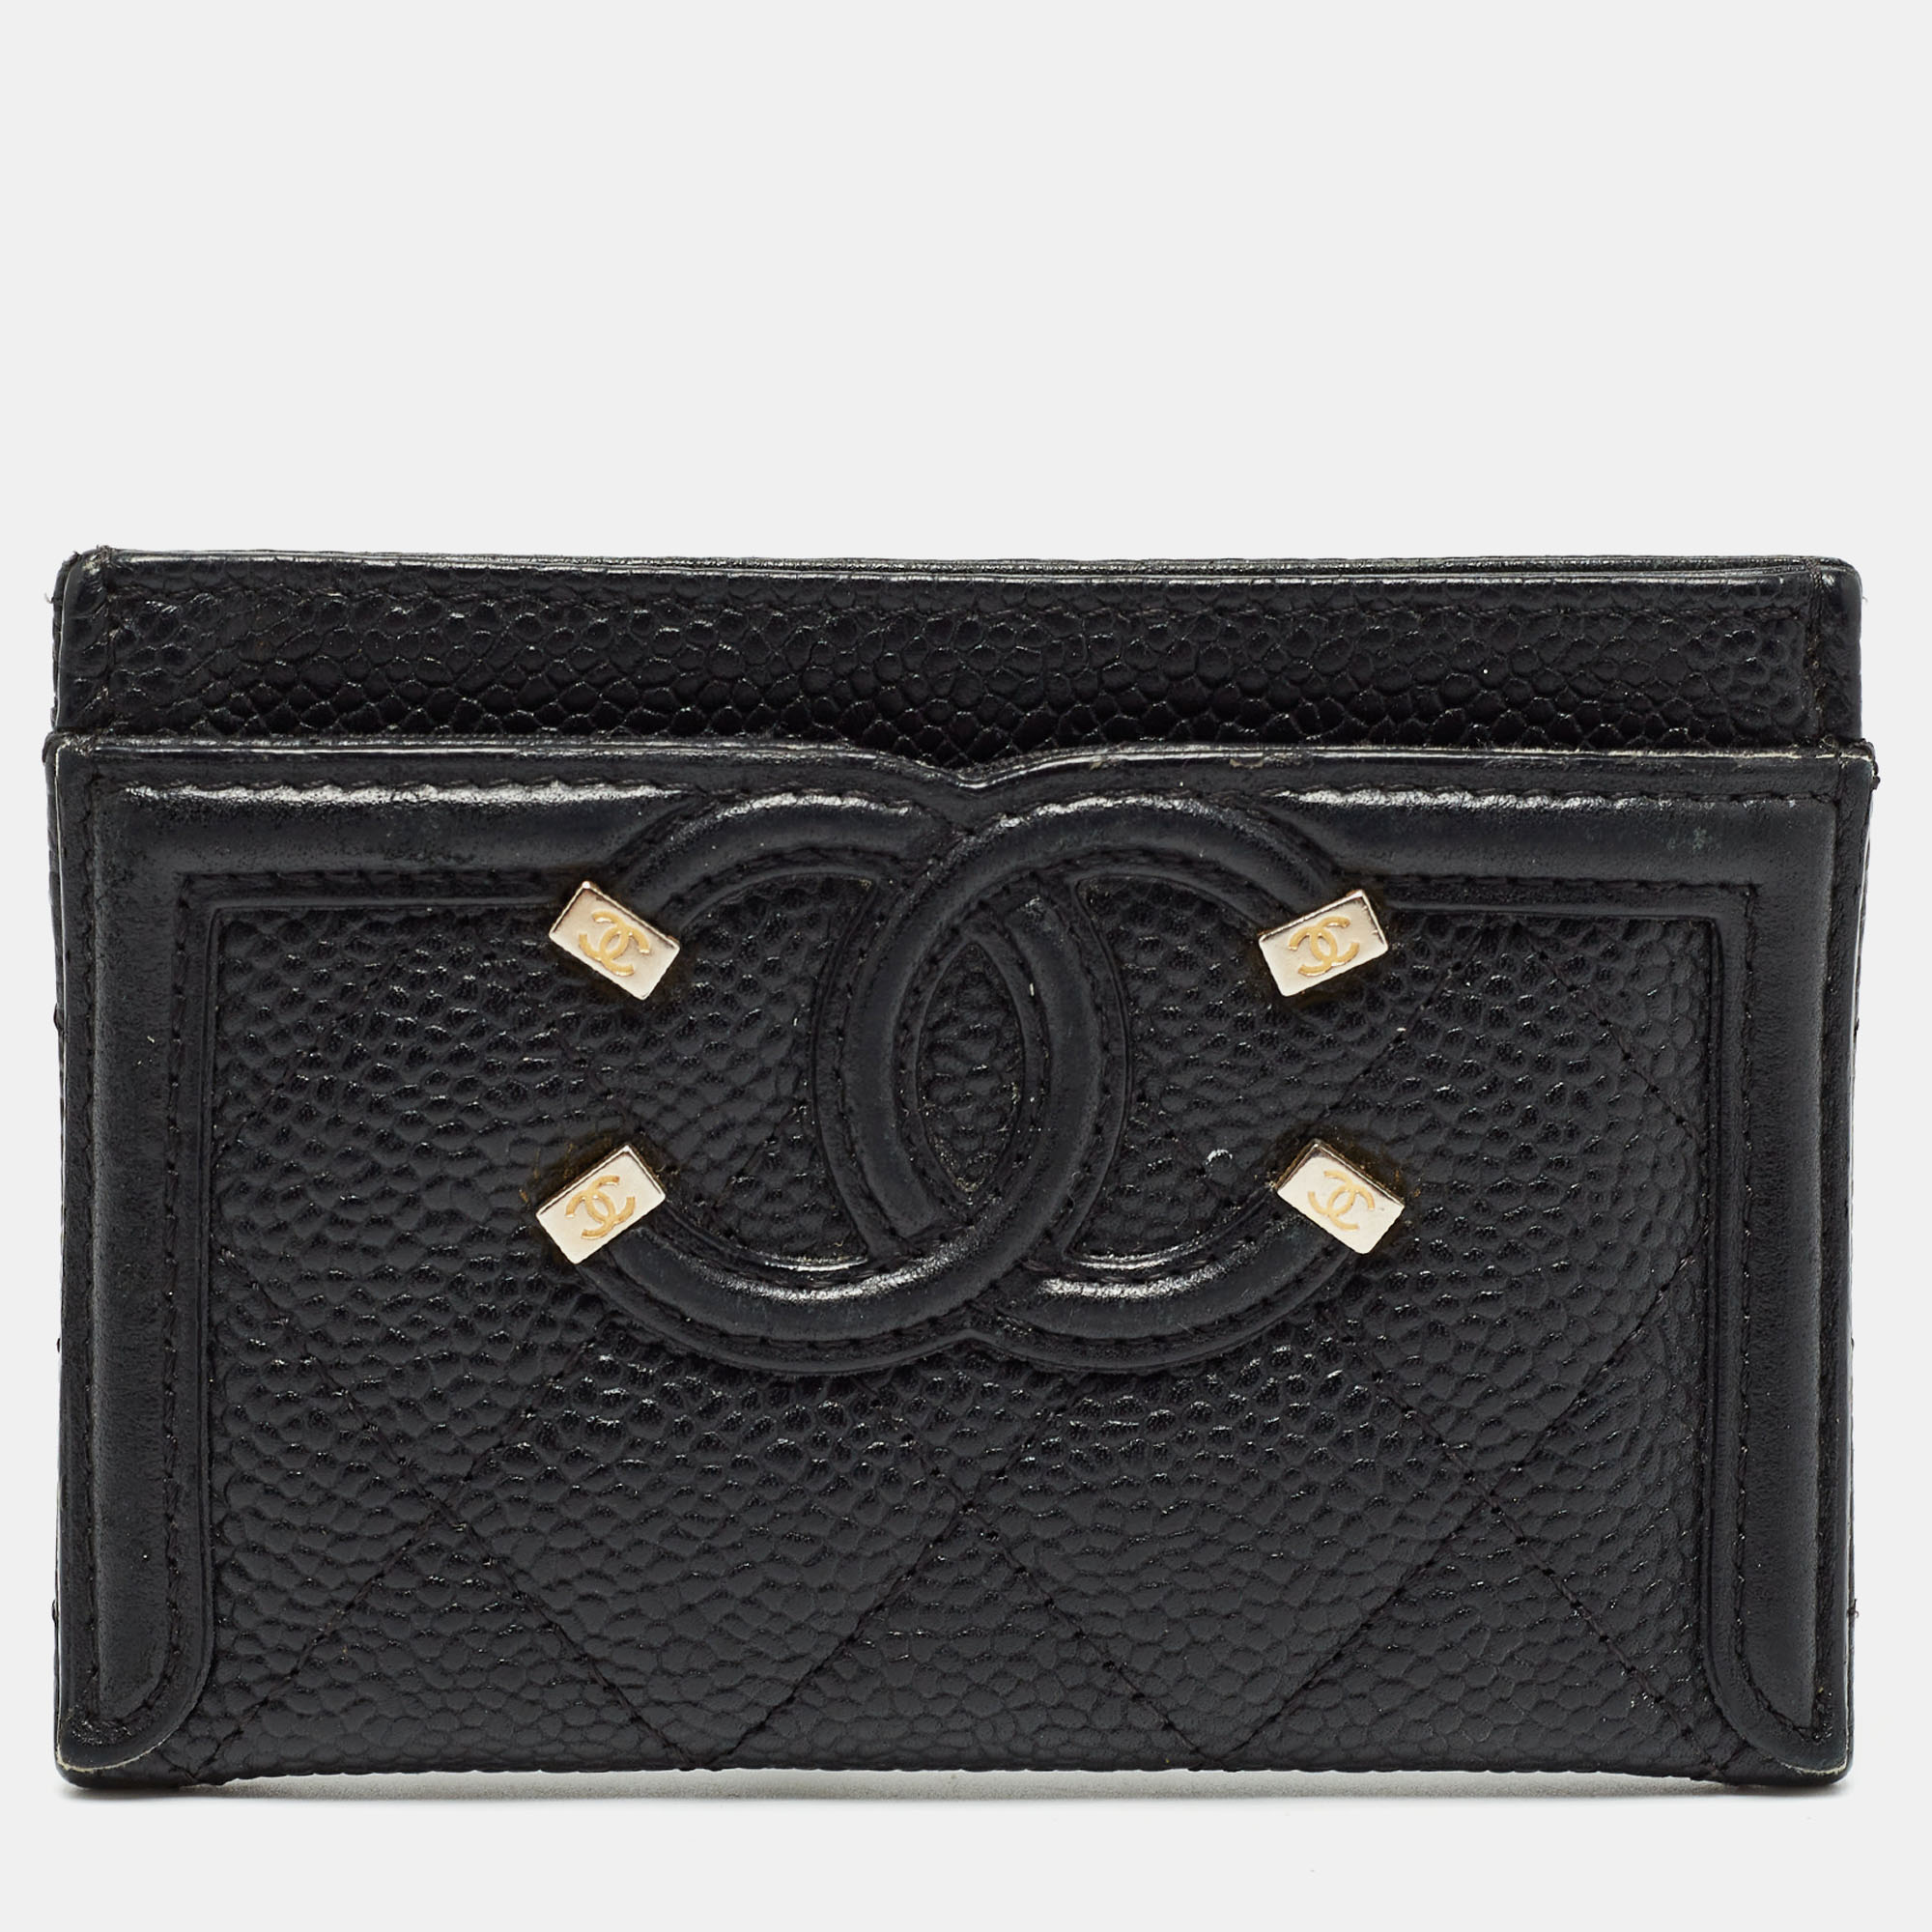 Pre-owned Chanel Black Caviar Leather Cc Filigree Card Holder